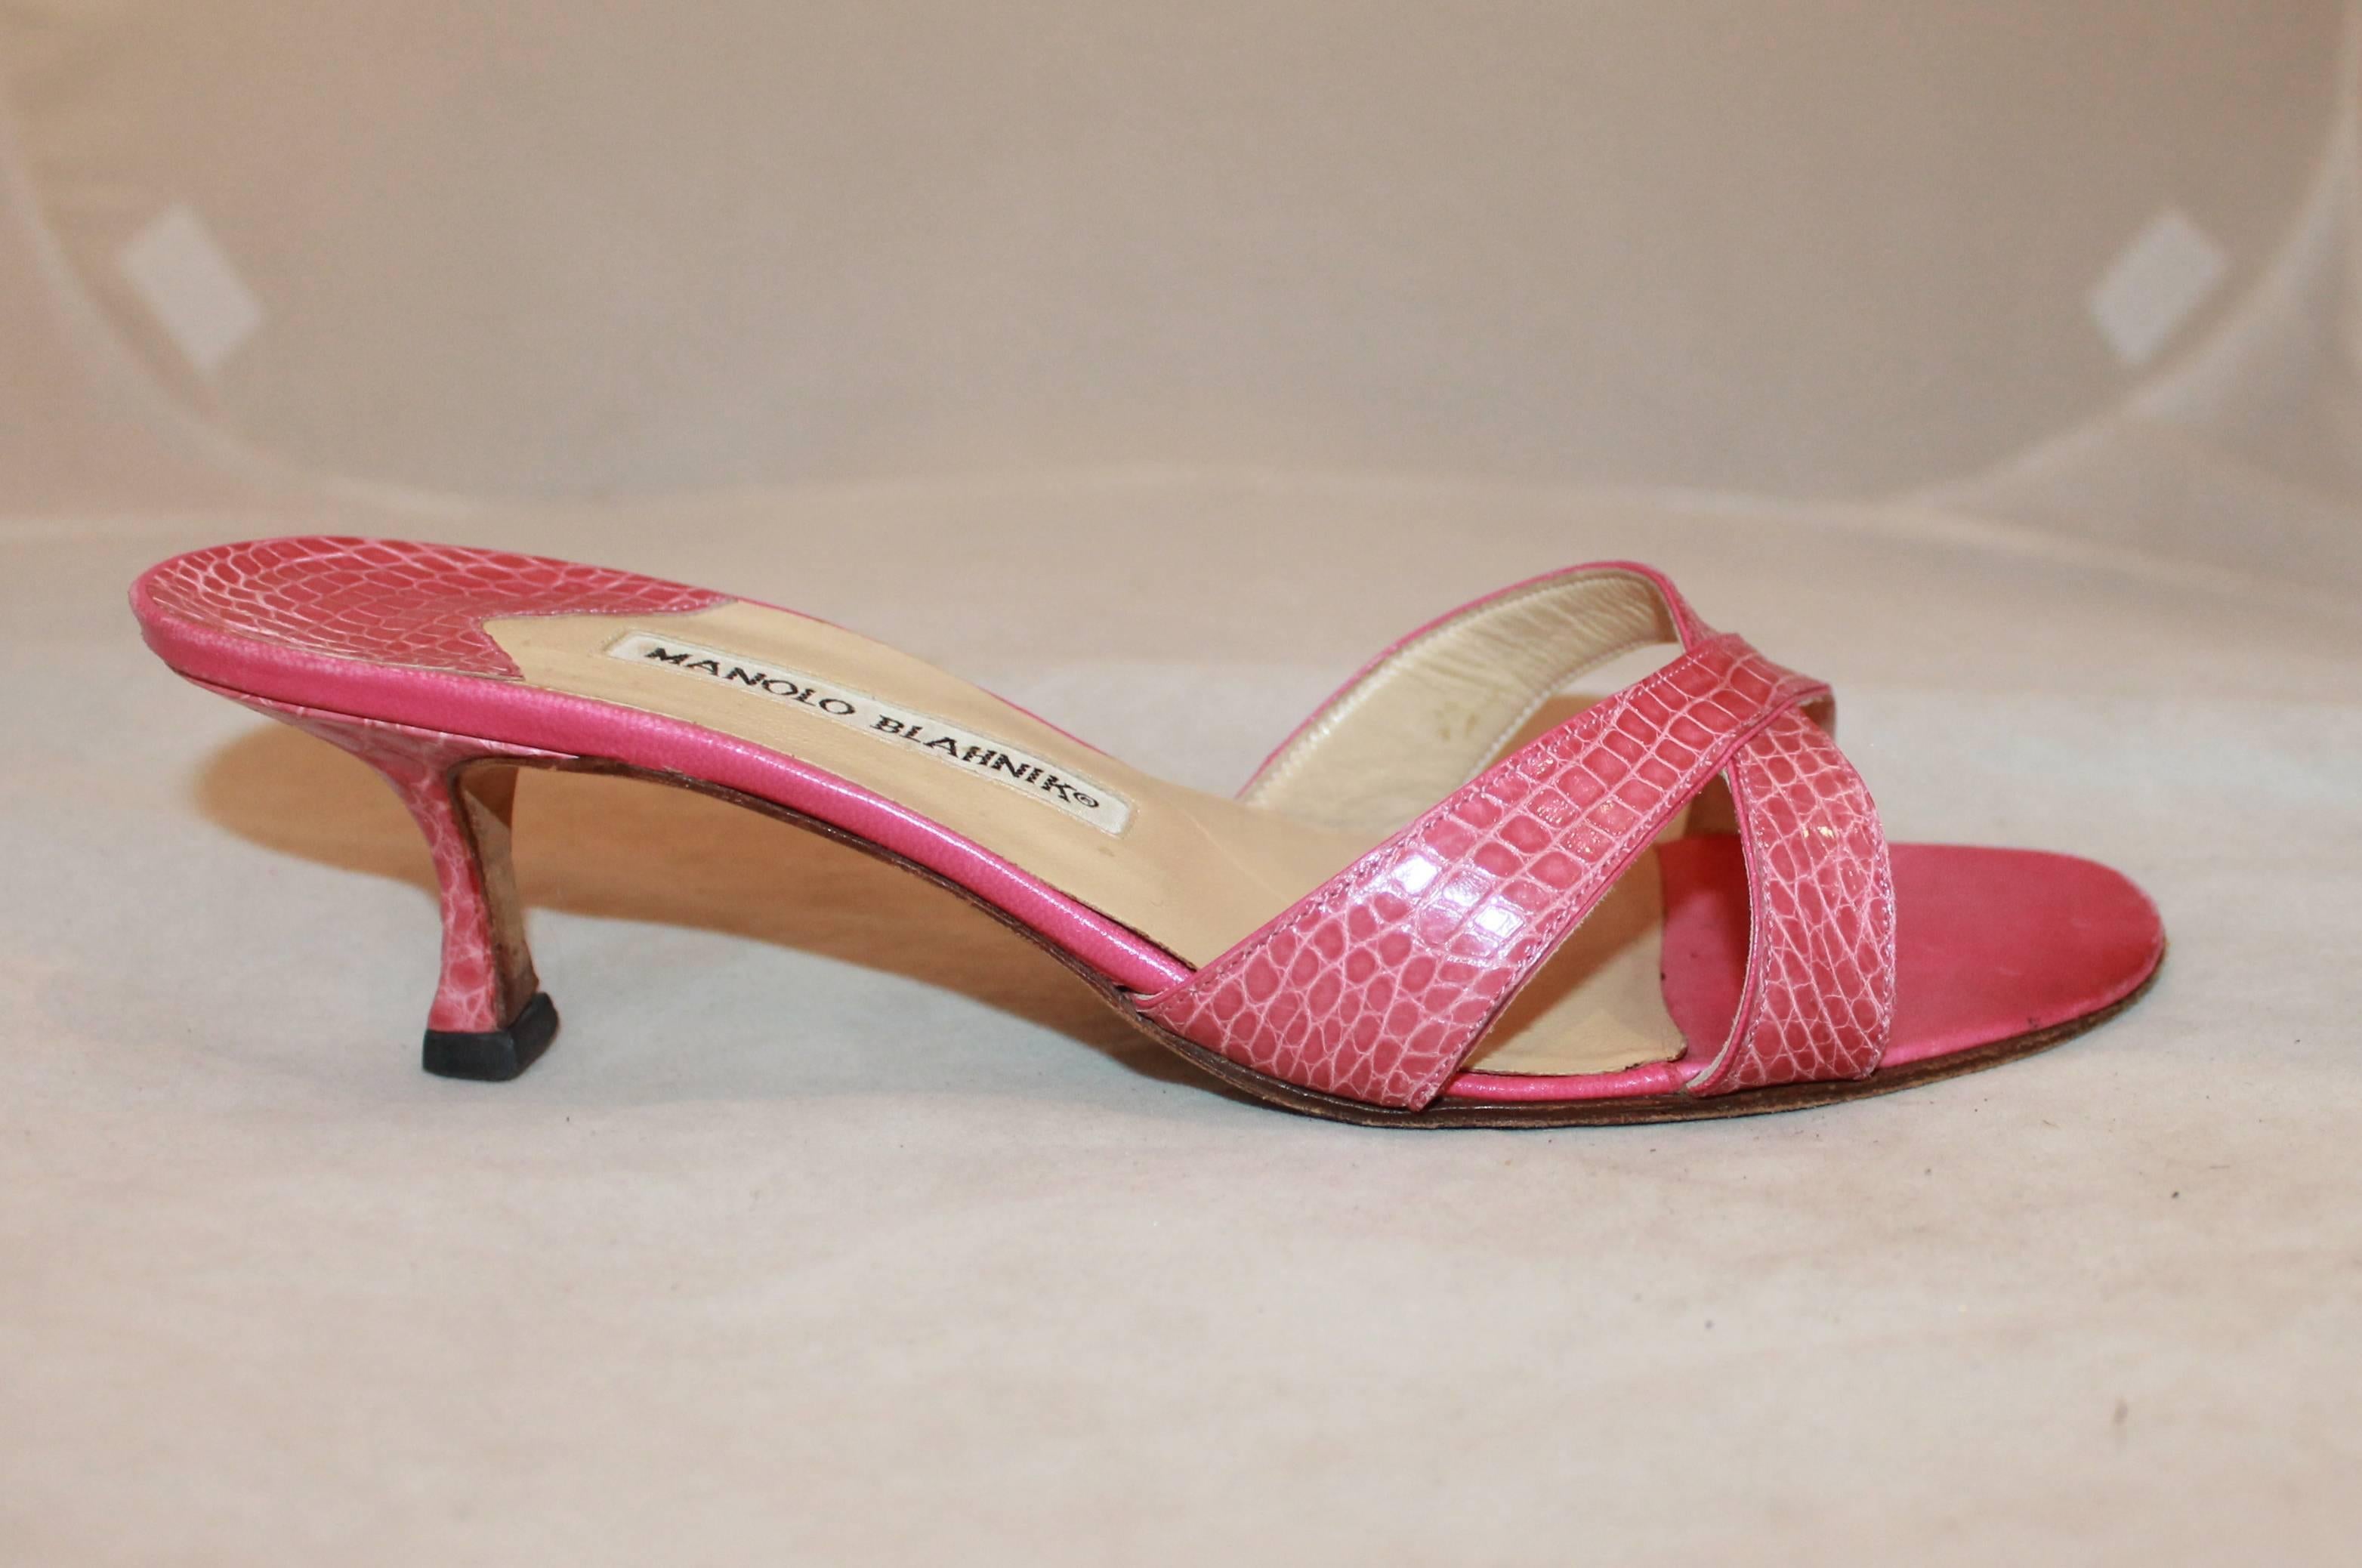 Manolo Blahnik Pink Crocodile Crisscross Slide with Heel - 38.5. These pink heels are slides with two straps crisscrossing on the top. They are in very good condition and show some wear on the bottom.

Measurements:
Heel- 2